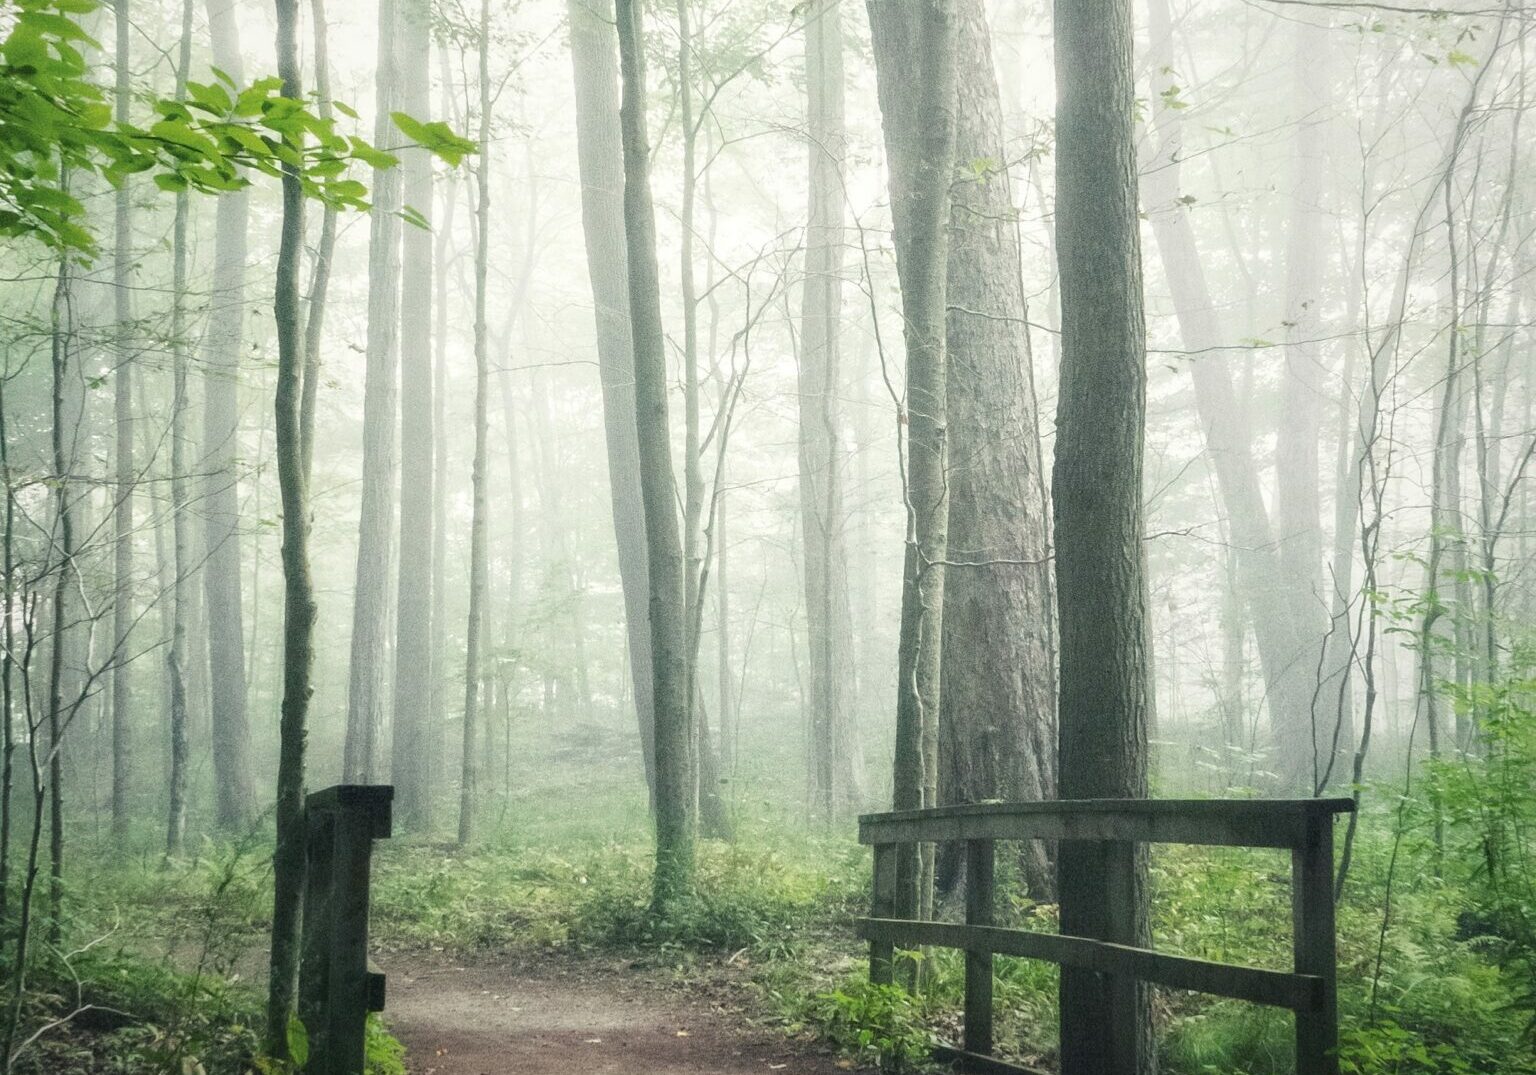 A picture of a footpath through a misty forest